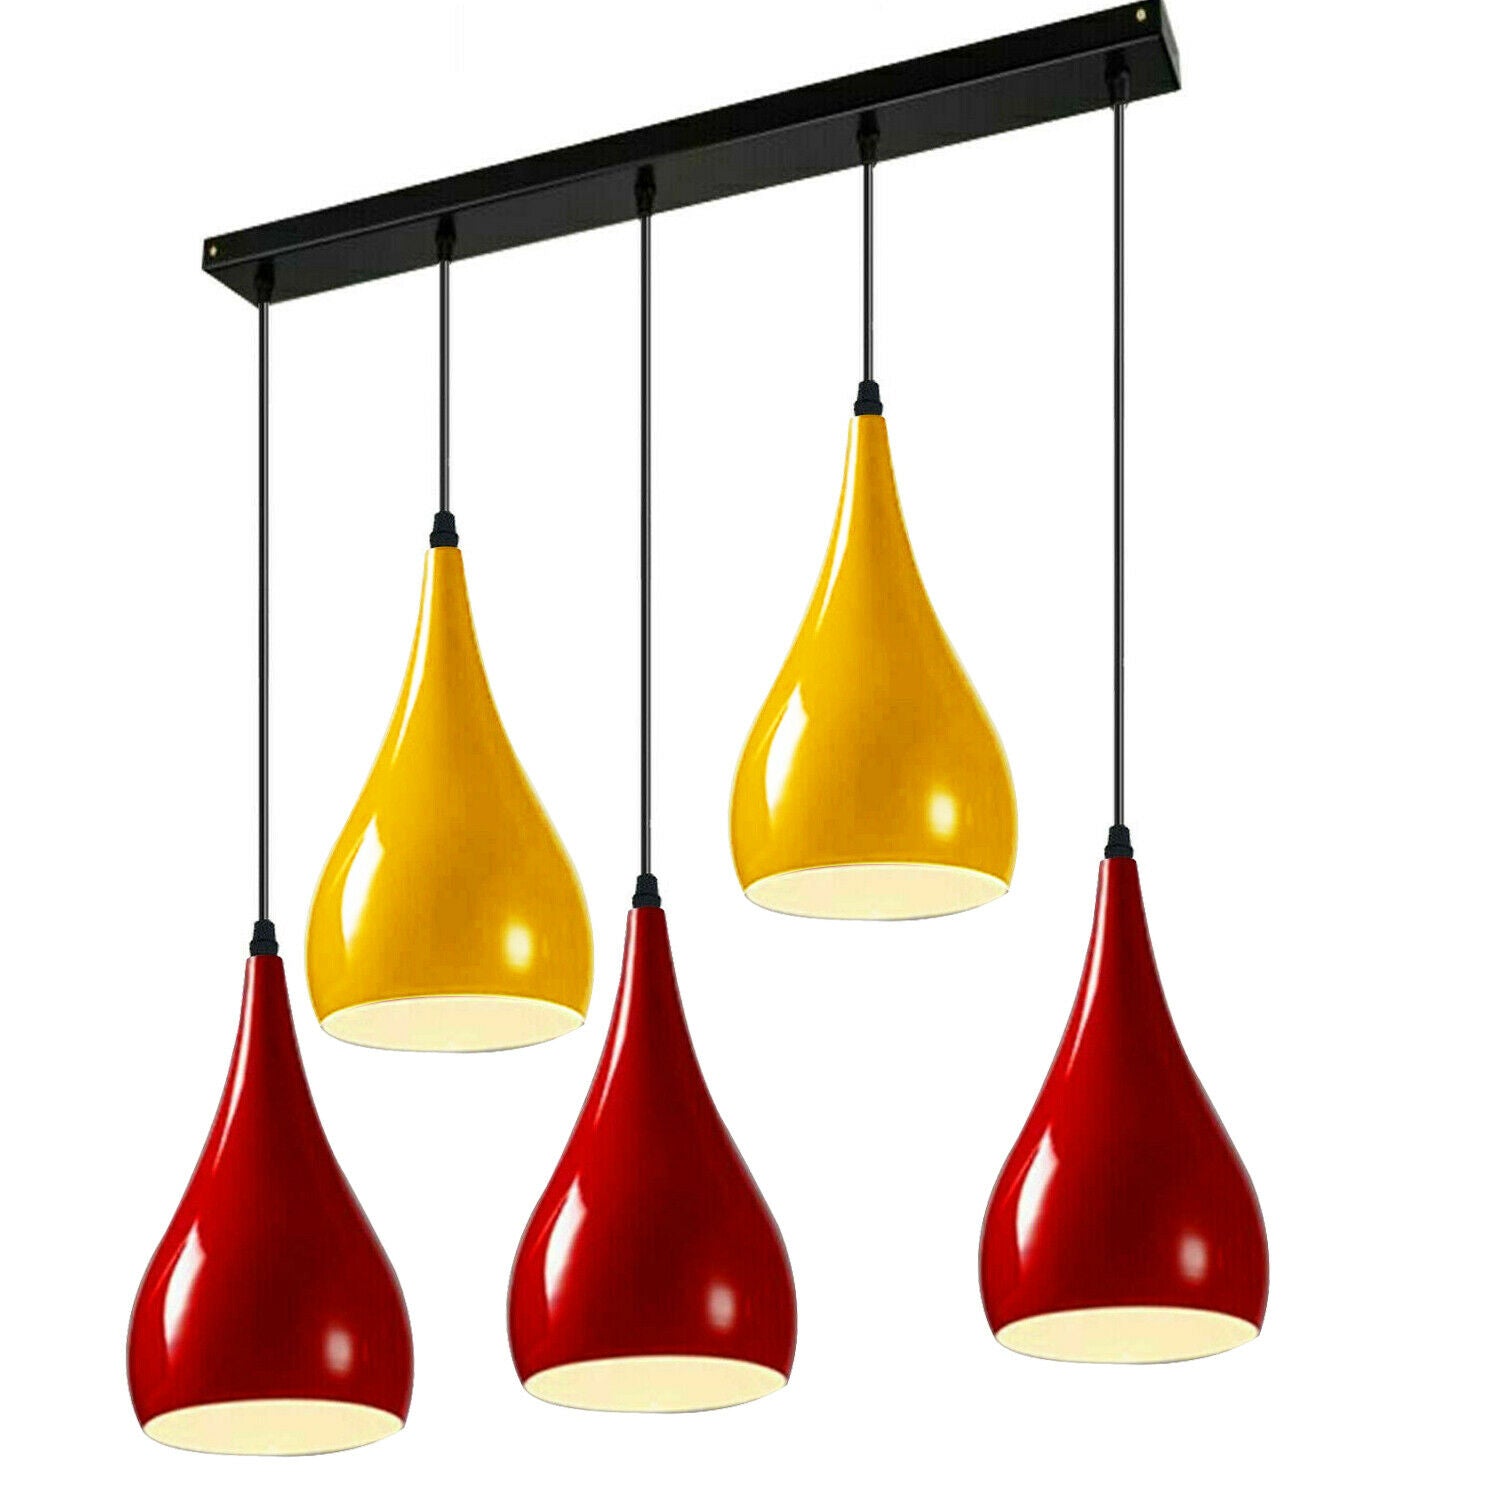 Red And Yellow Light Pendant Hanging Light Industrial 5 Outlet Pendant~1630 - LEDSone UK Ltd